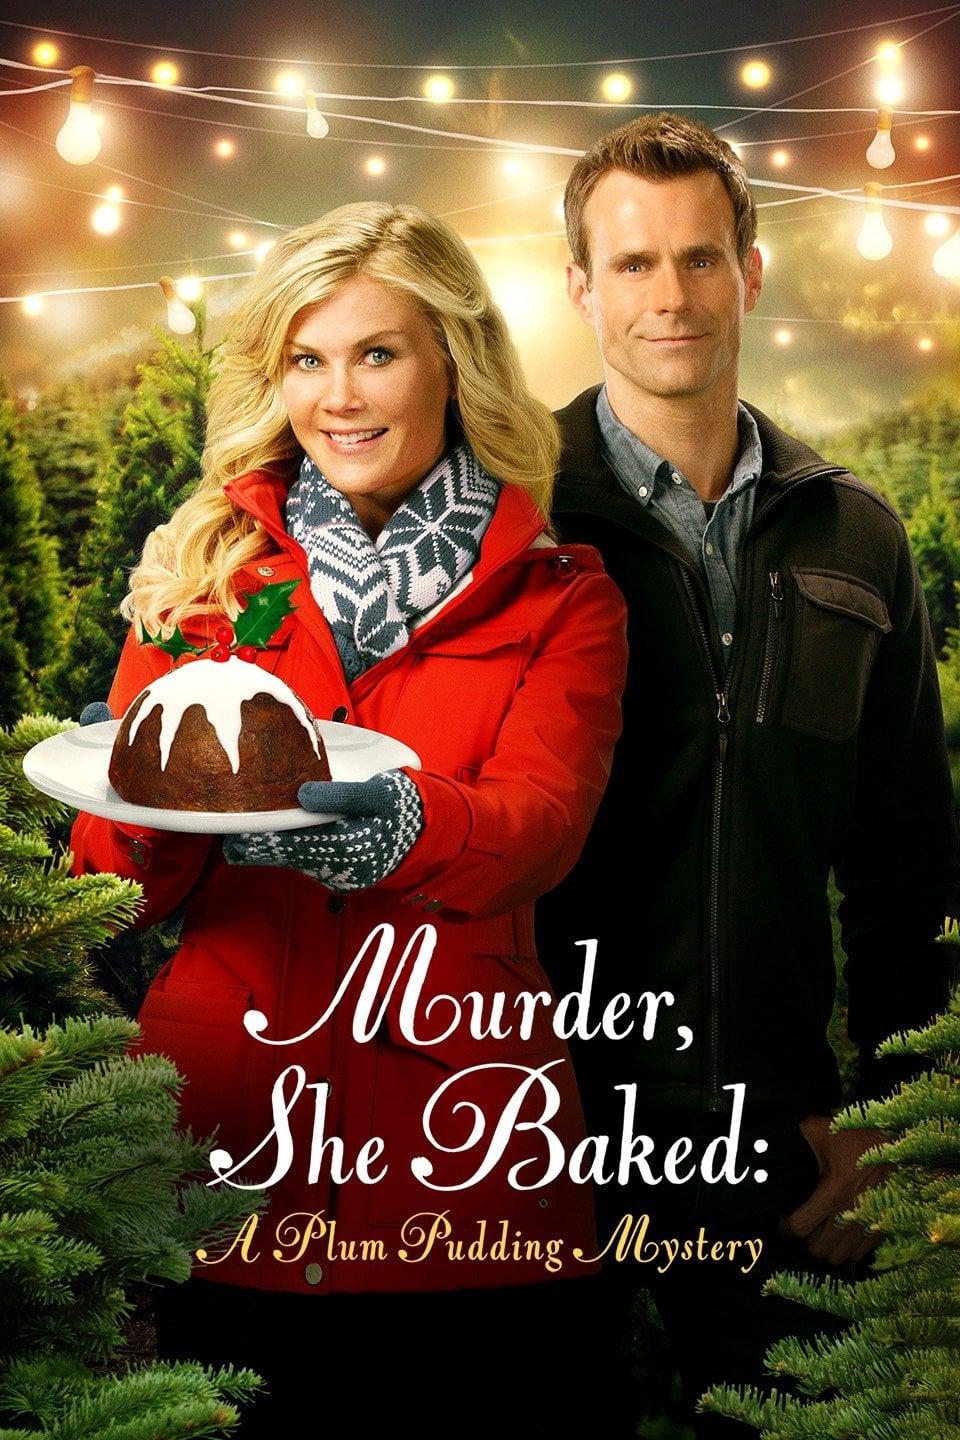 Murder, She Baked: A Plum Pudding Mystery poster